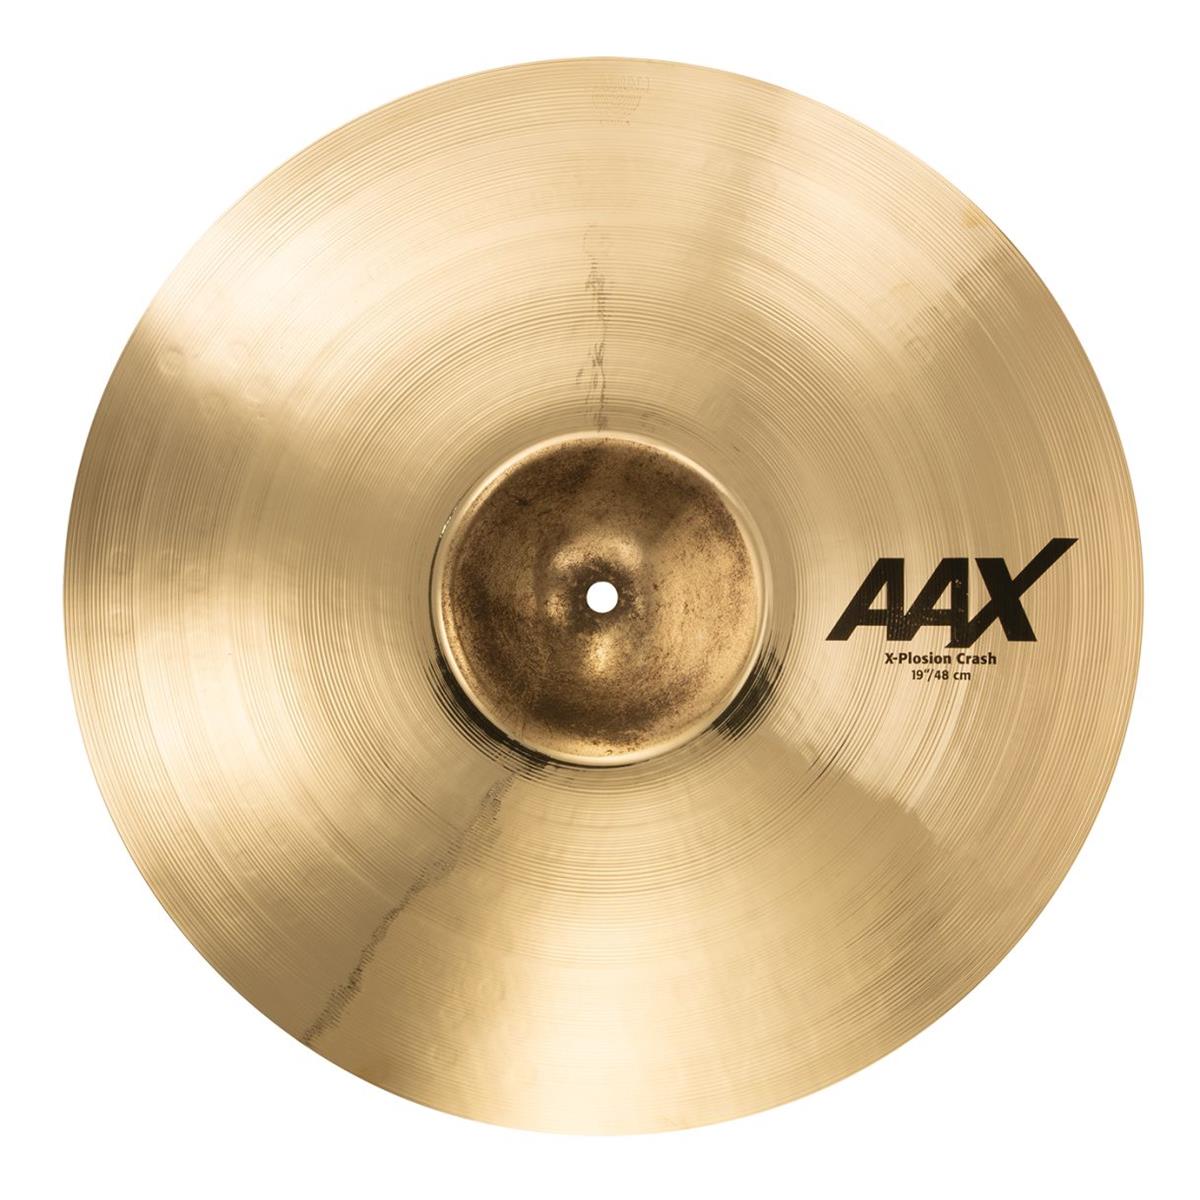 Sabian 19" AAX X-Plosion Crash Cymbal, Medium-Thin, Brilliant Bursting with energy, the innovative Sabian 19" AAX X-Plosion Crash explodes with fuller, punchier power. Also available in an XT Fast Crash model and 11" AAX Splash. The Sabian AAX series delivers consistently bright, crisp, clear and cutting responses - AAX is the ultimate Modern Bright sound!